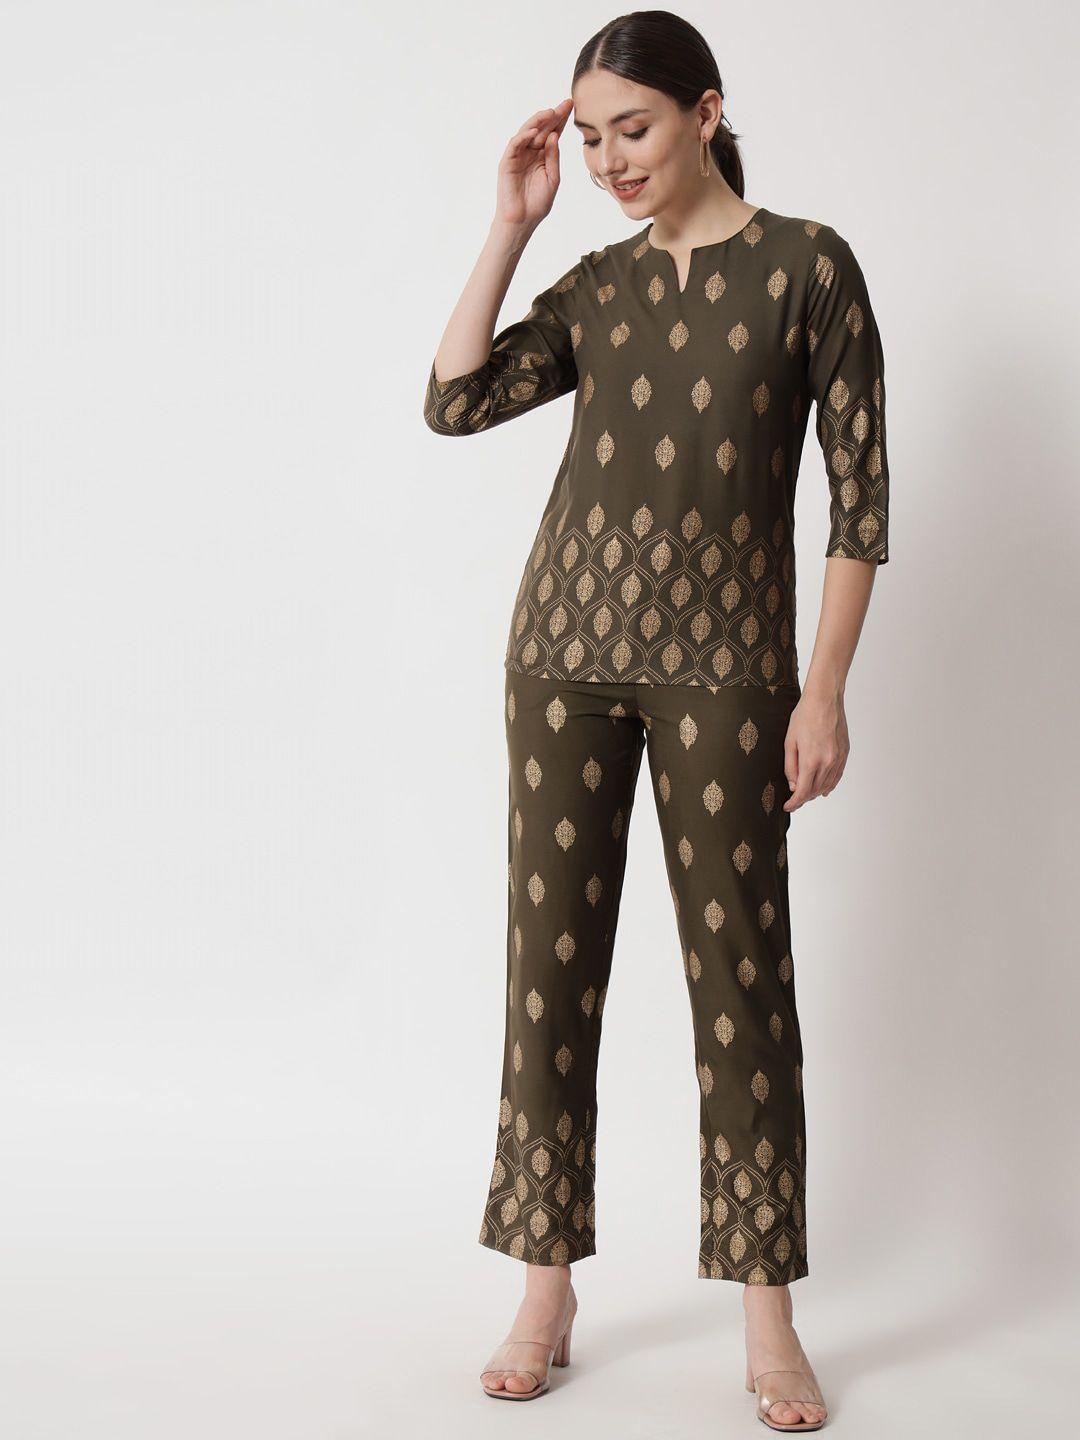 here&now women olive green & gold-toned ethnic printed night suit